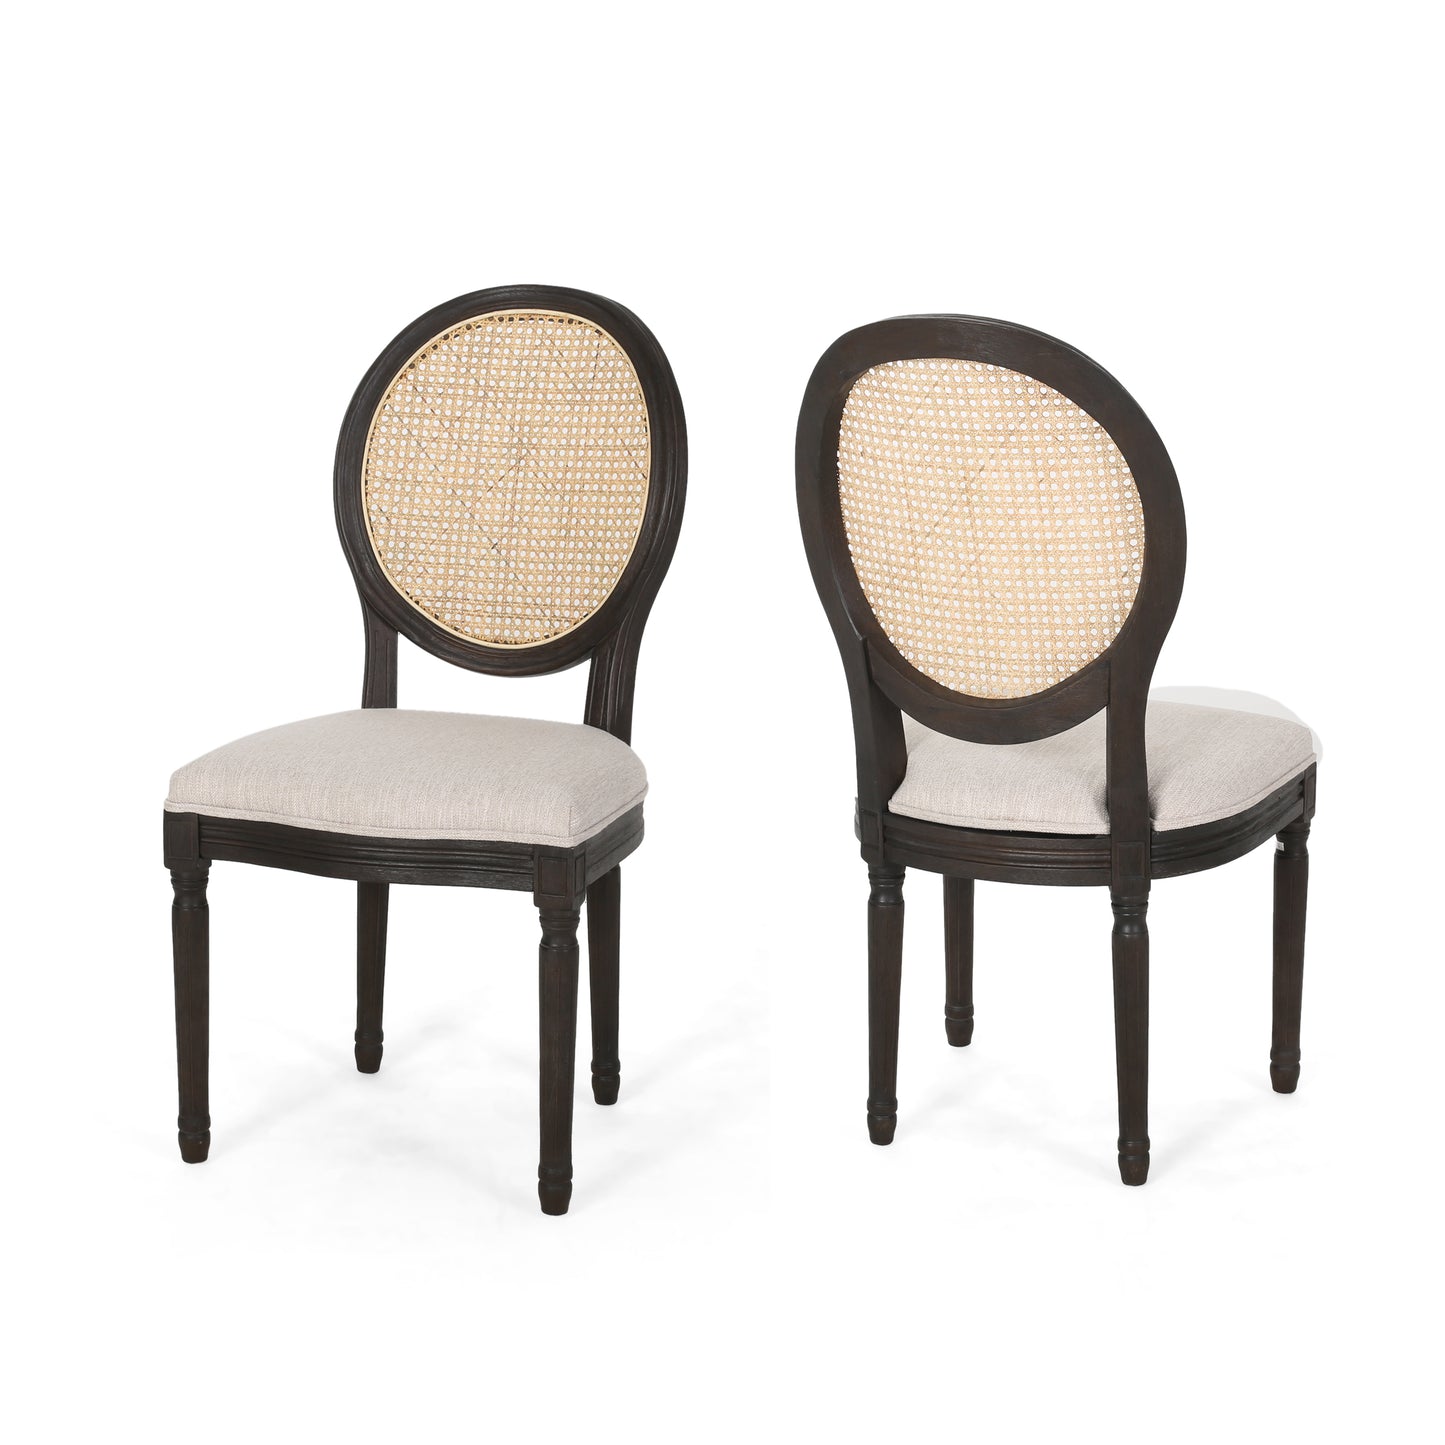 Laney French Style Oval Cane Back Dining Chairs (Set of 2)